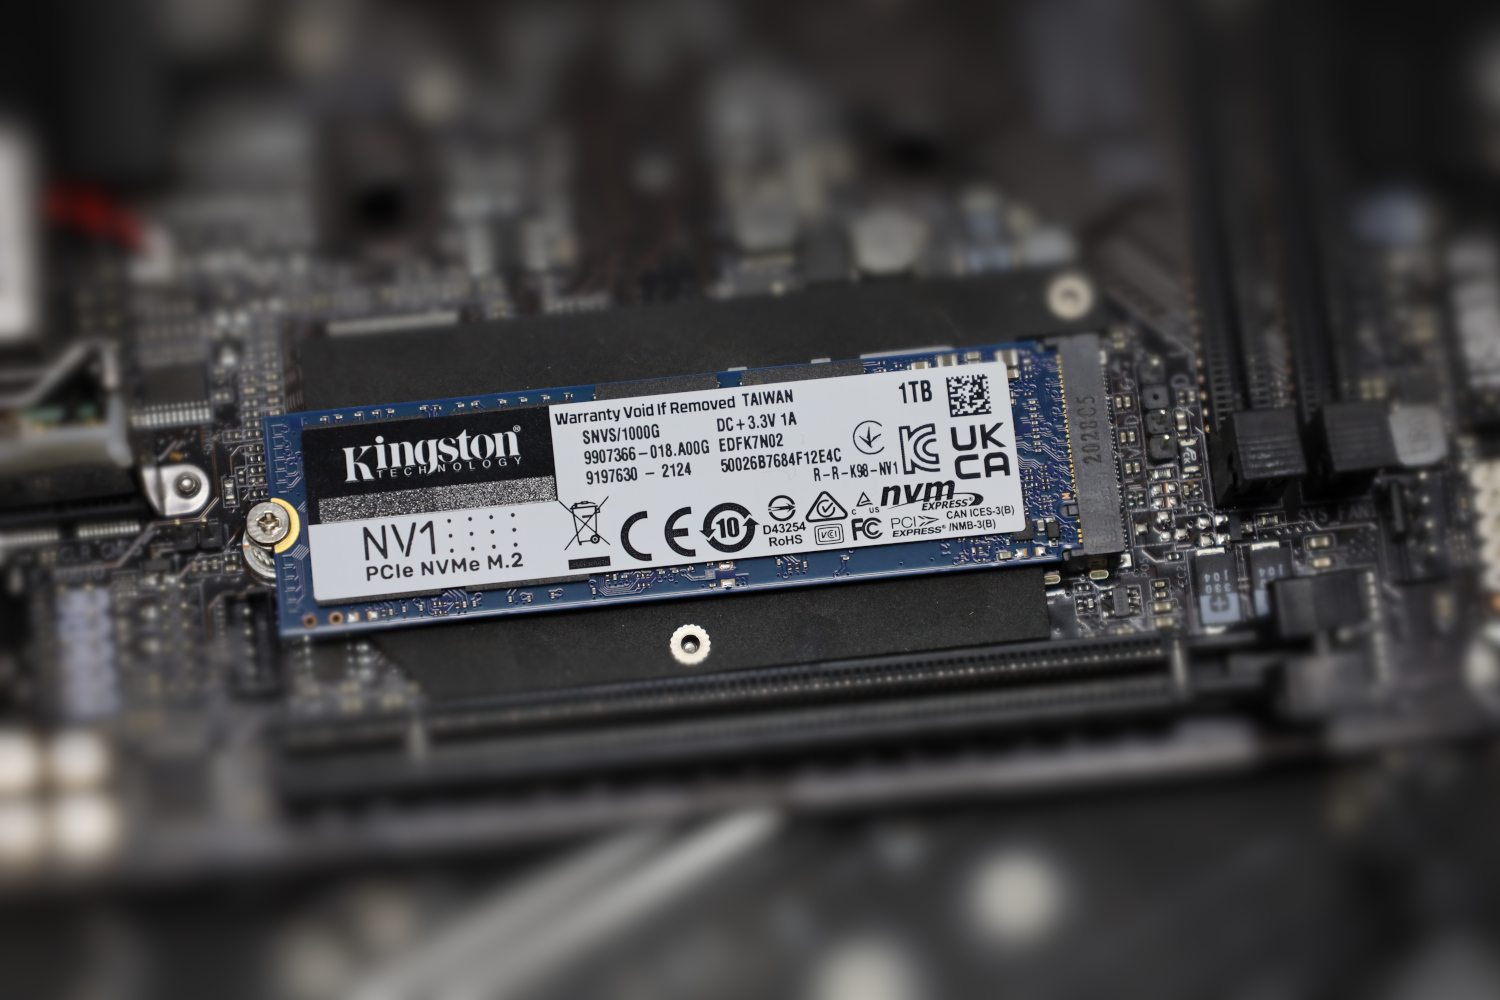 Detectable Perforar Monica kingston drivers ssd, How Upgrade Kingston SSD Firmware - StorageReview.com  - finnexia.fi